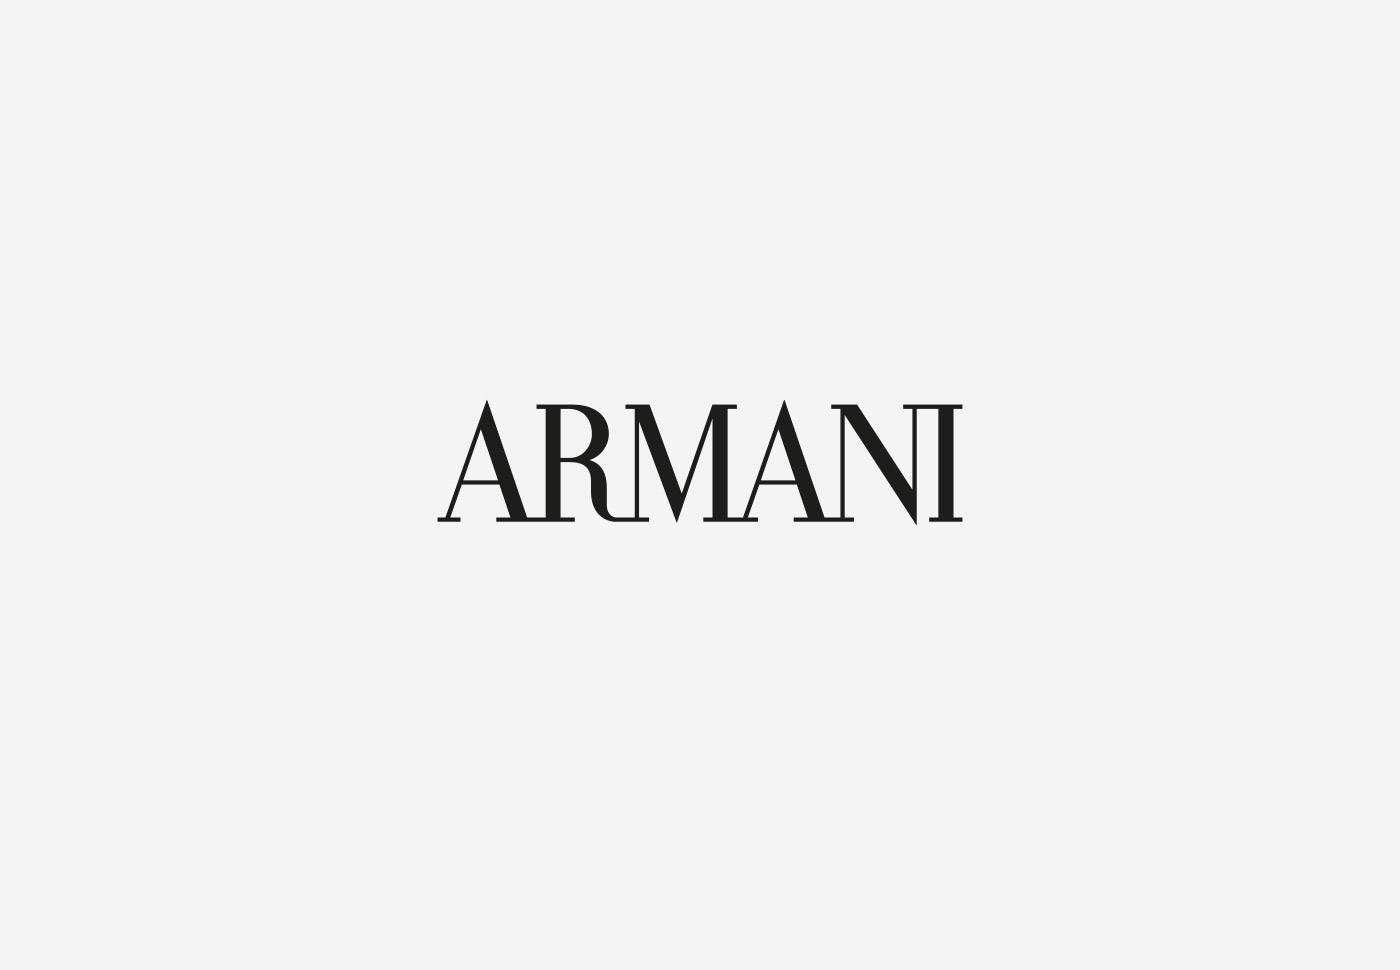 Armani – Creative direction and design consulting